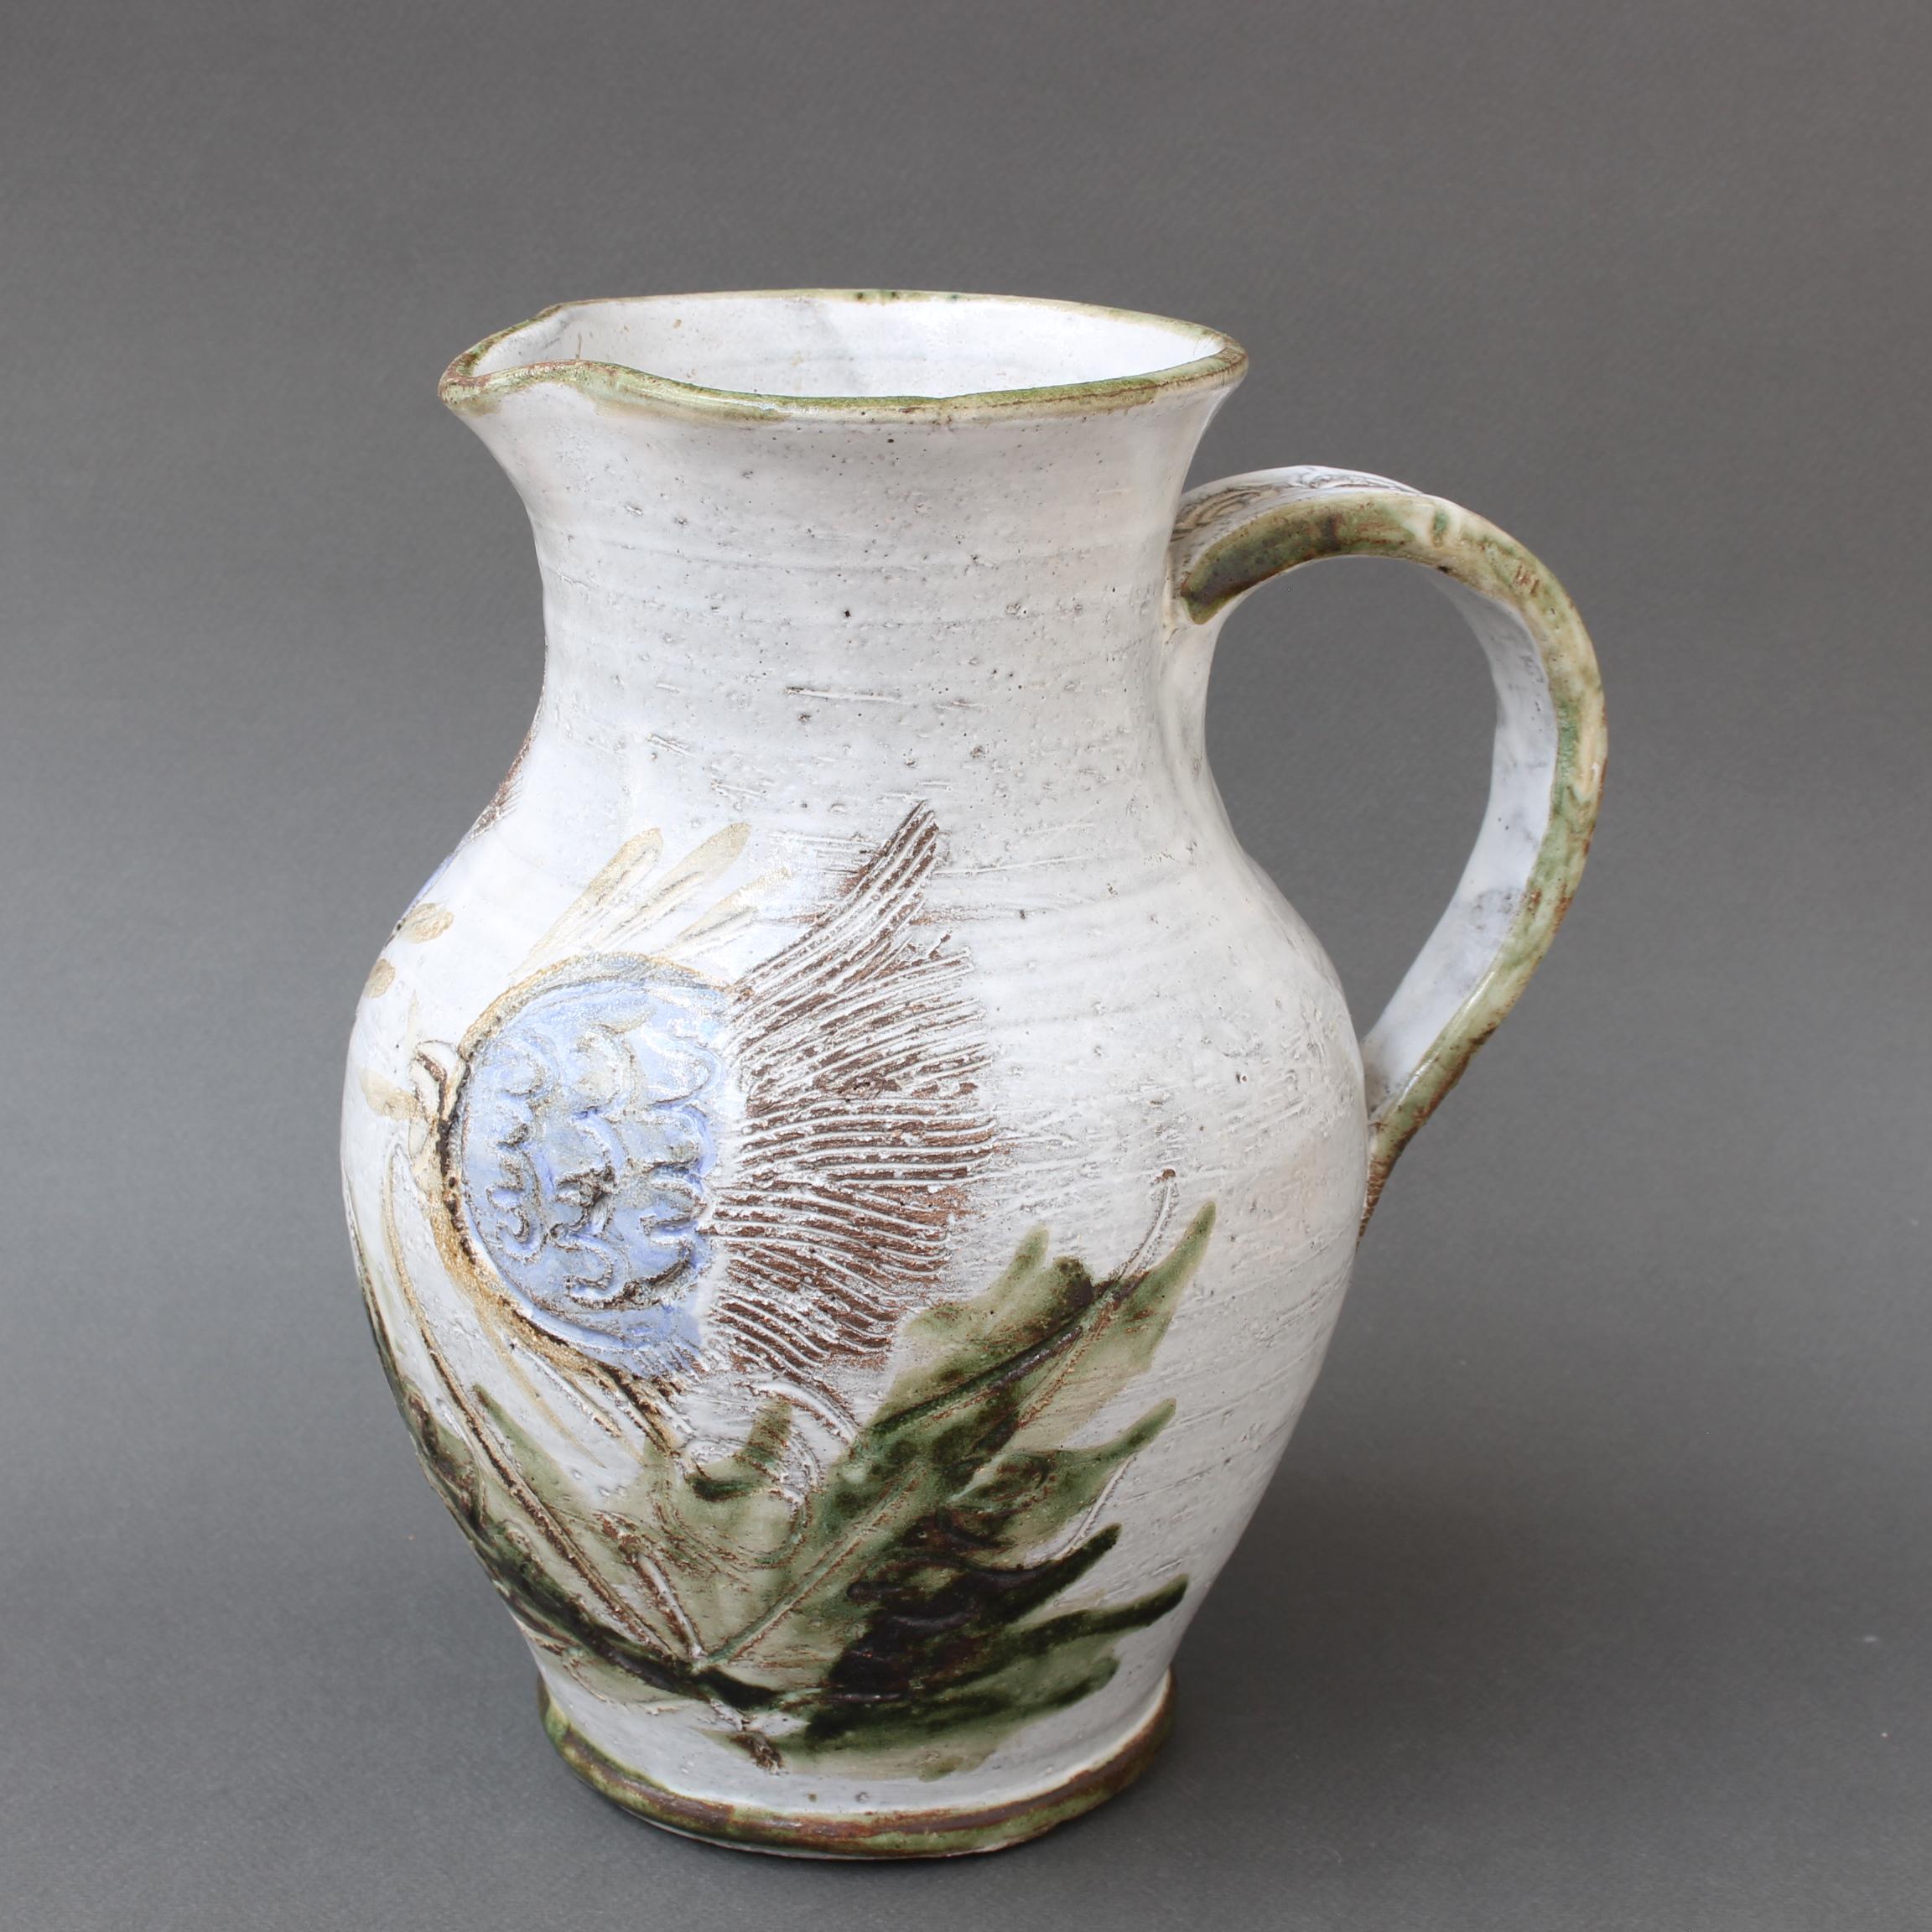 Large mid-century ceramic pitcher (circa 1970s) by Albert Thiry. A classic Thiry design and decoration scheme, this pitcher's base colour is done in a milky-white glaze with painted blue thistle flowers along with their green leaves. It is elegant